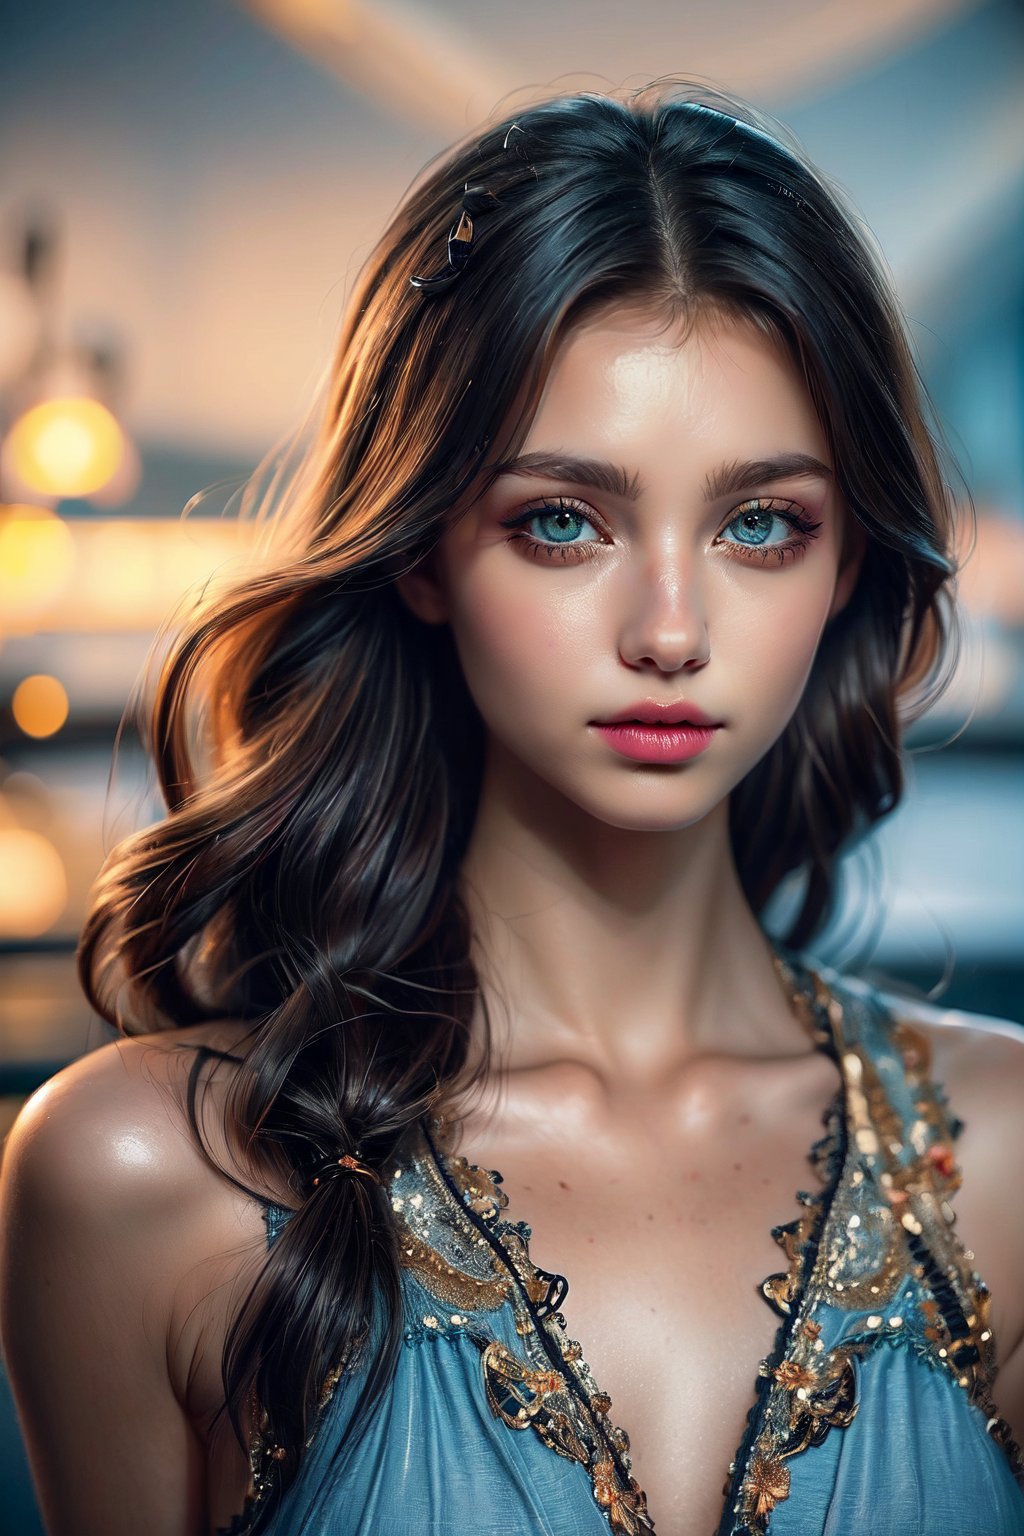 (masterpiece, high quality:1.5), 8K, HDR, 
1girl, well_defined_face, well_defined_eyes, ultra_detailed_eyes, ultra_detailed_face, by FuturEvoLab, 
ethereal lighting, immortal, elegant, porcelain skin, jet-black hair, waves, pale face, ice-blue eyes, blood-red lips, pinhole photograph, retro aesthetic, monochromatic backdrop, mysterious, enigmatic, timeless allure, the siren of the night, secrets, longing, hidden dangers, captivating, nostalgia, timeless fascination, 